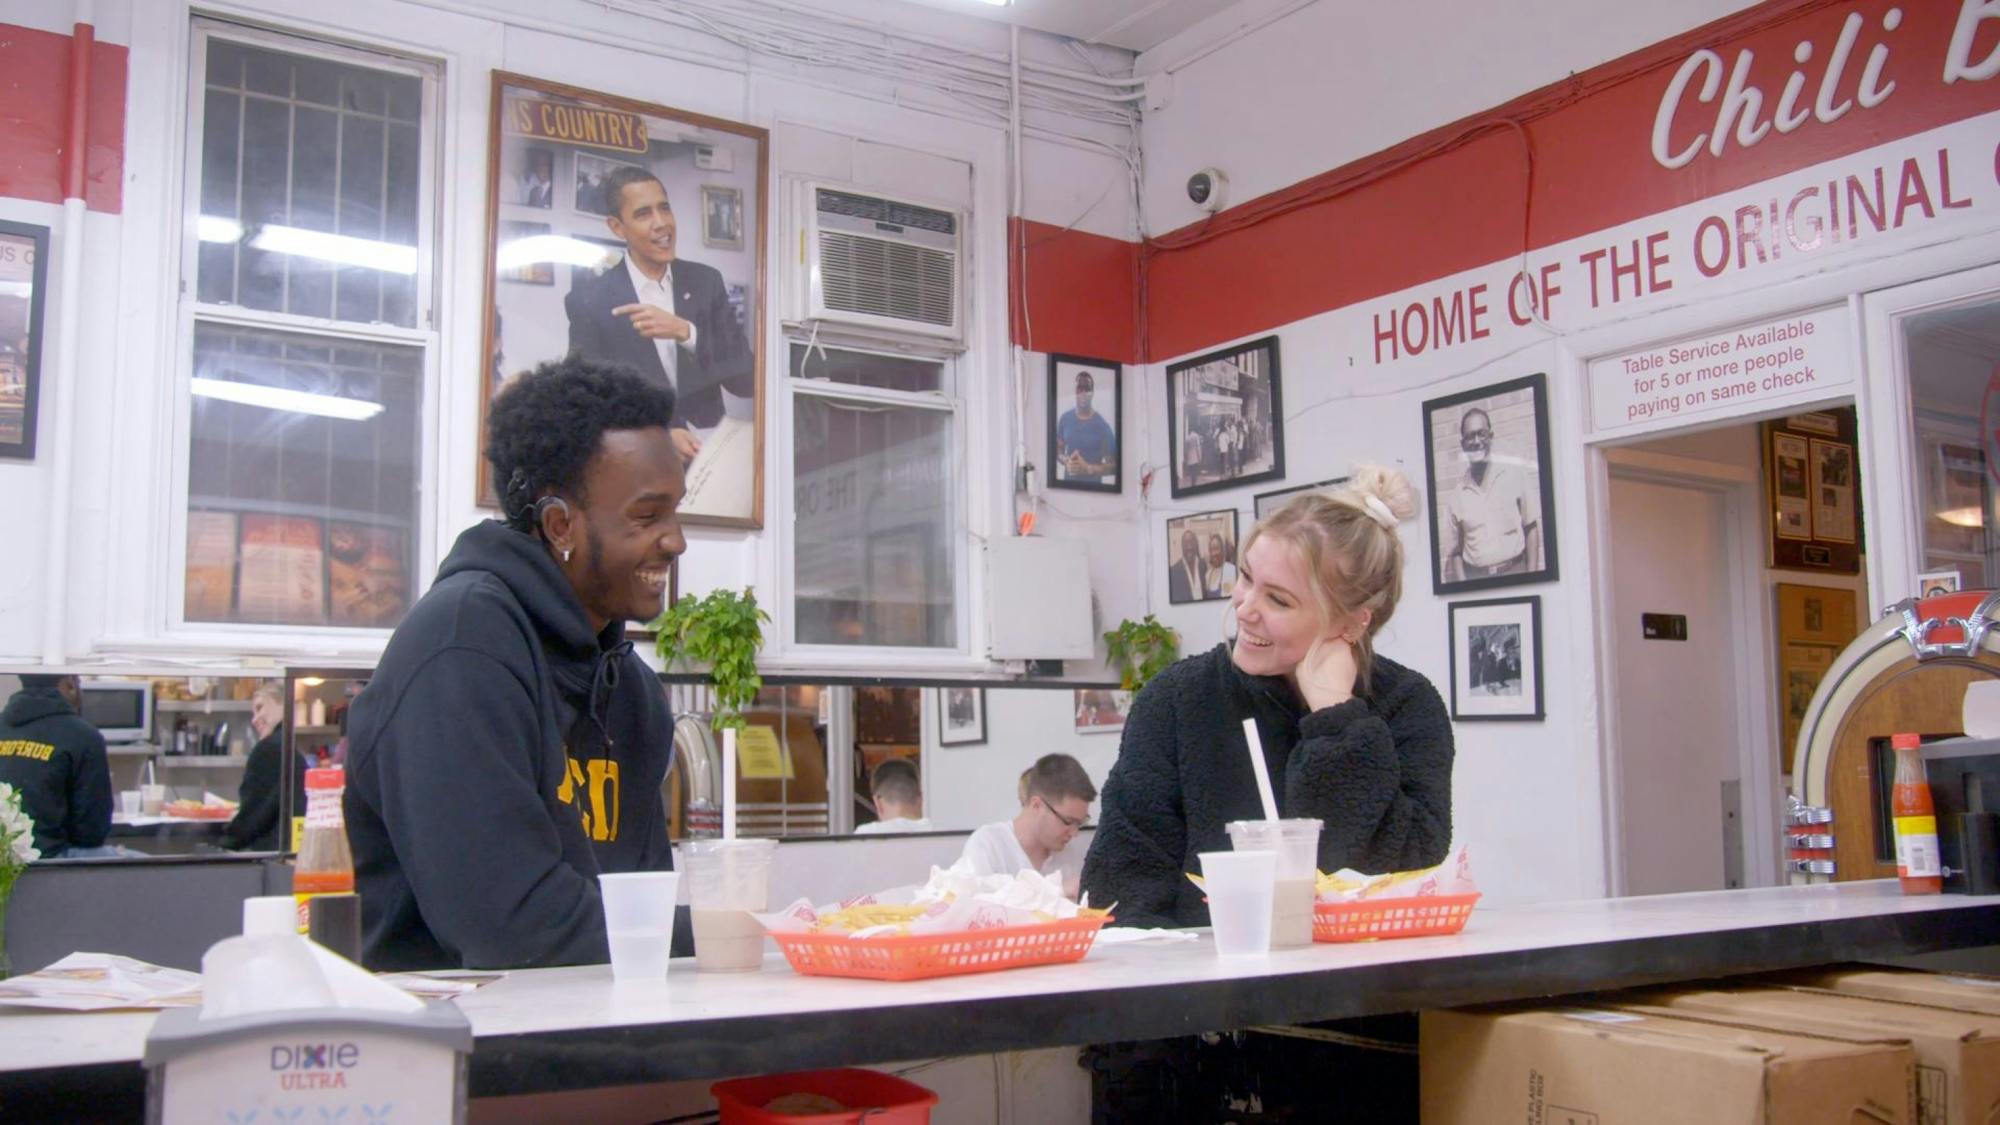 Cheyenna Clearbrook and Rodney Burford sit it in an old timey diner together. They both eat shakes and fries and are dressed in black sweatshirts. They smile at each other and look utterly adorable. In the background is a picture of President Barak Obama.